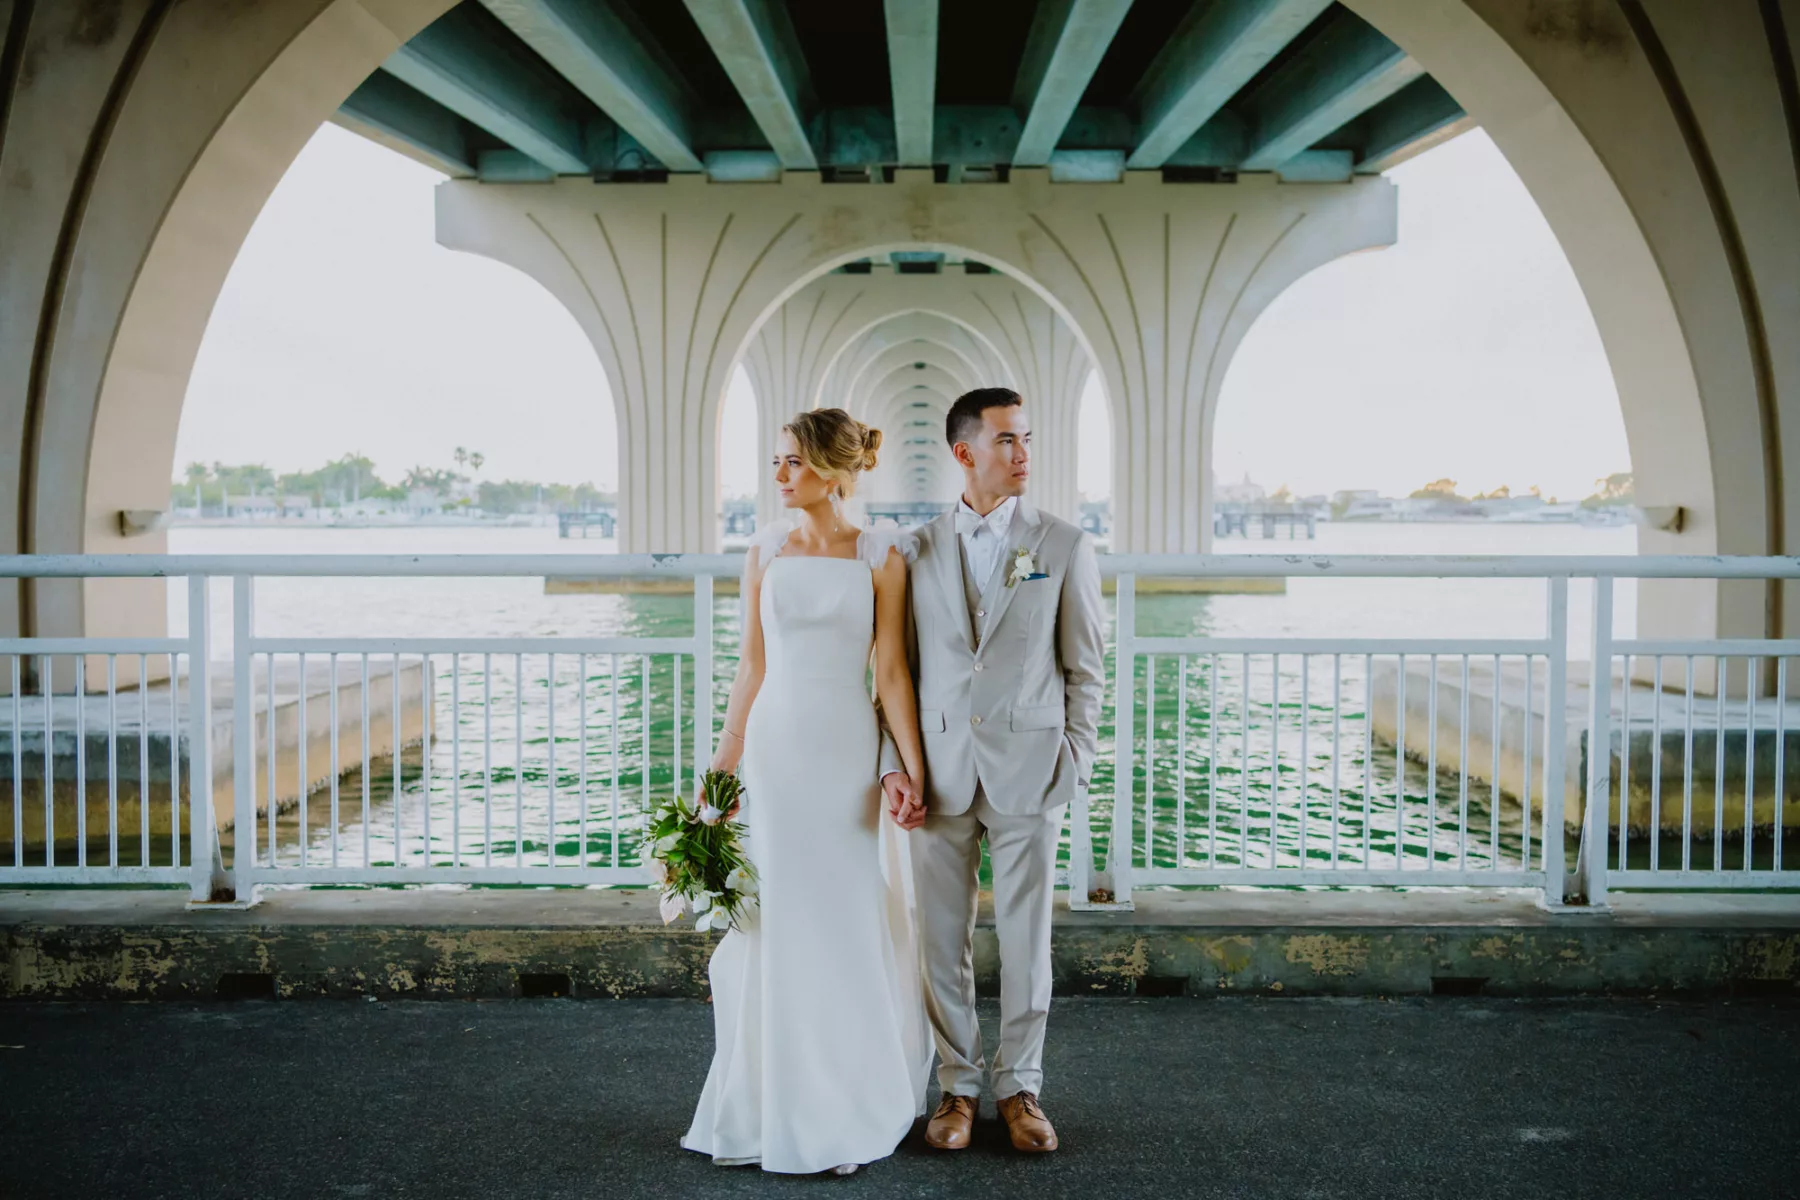 Classic White Satin Fit and Flare Justin Alexander Wedding Dress with Tulle Cape Veil Inspiration | Khaki Three Piece Groom Suit Attire Ideas | St Pete Photographer and Videographer Mars and the Moon Films